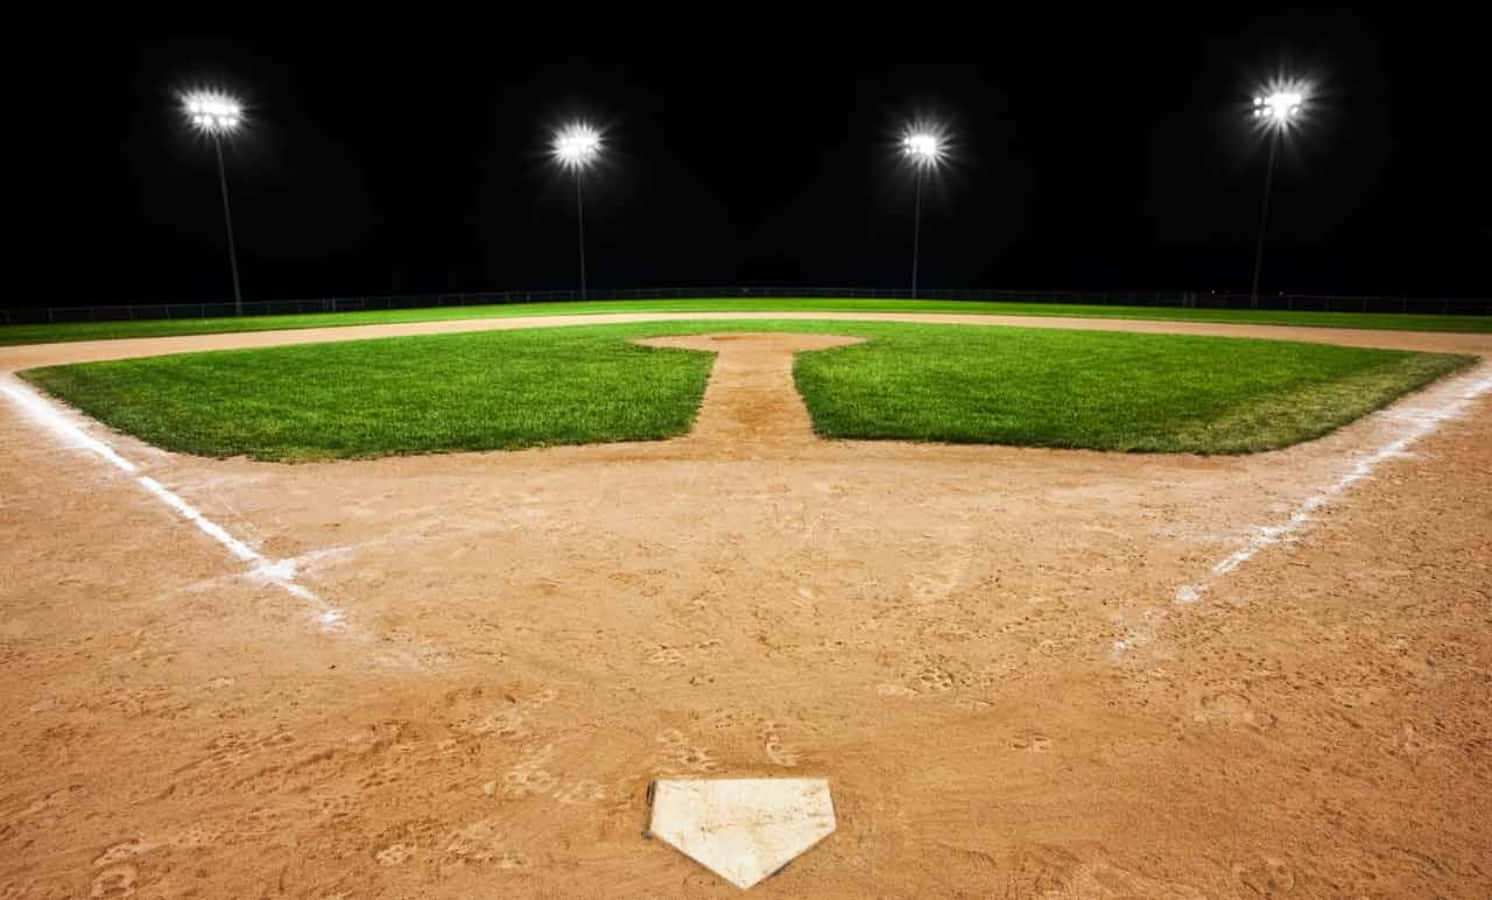 A Baseball Field At Night With Lights